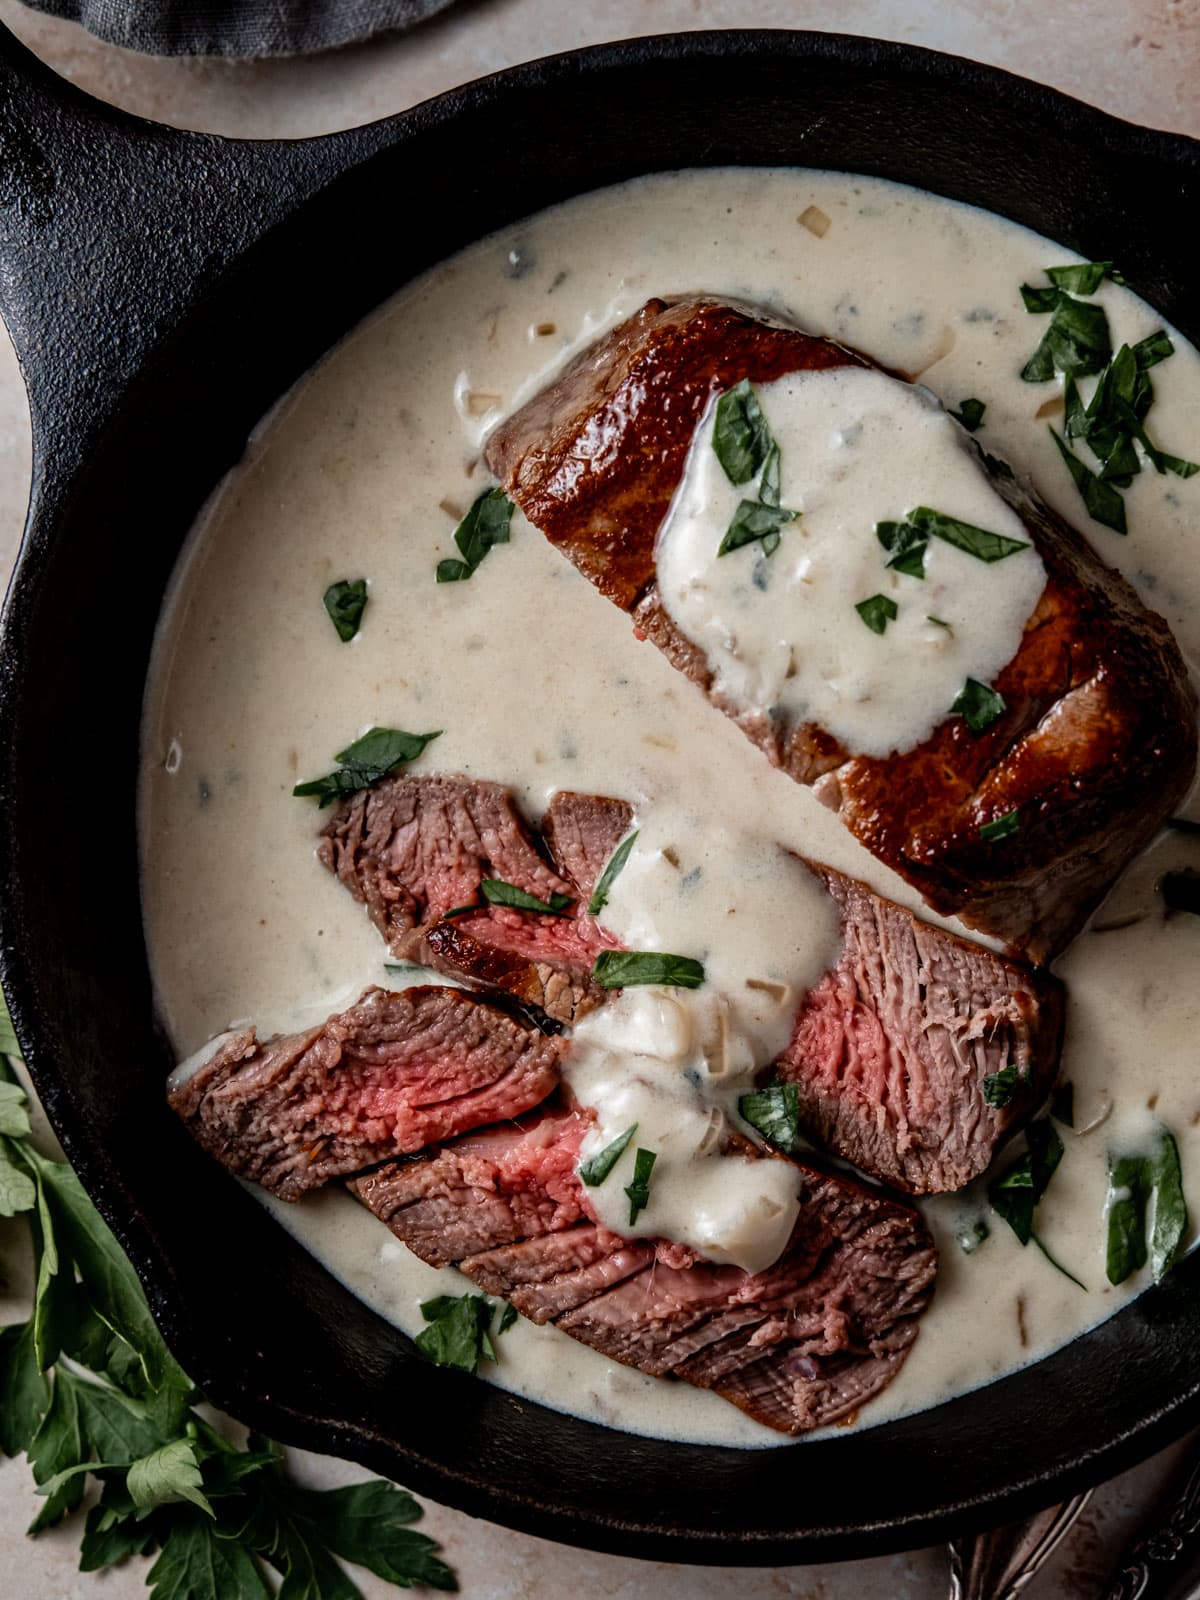 Tender filet mignon slices in small cast iron skillet, smothered in savory blue cheese sauce and topped with parsley